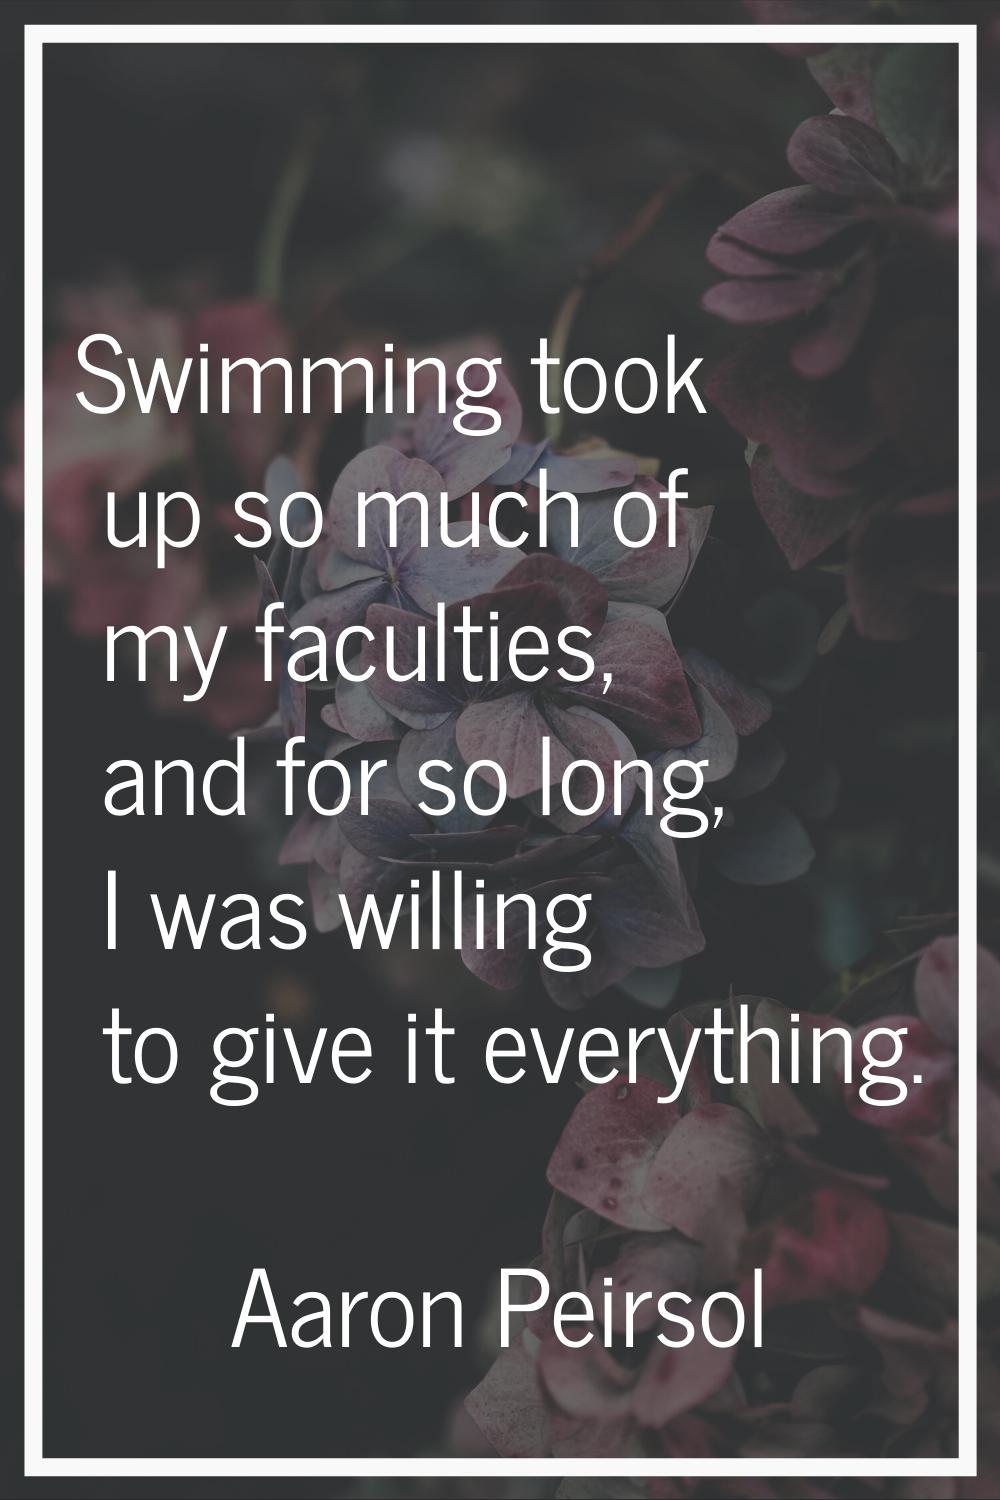 Swimming took up so much of my faculties, and for so long, I was willing to give it everything.